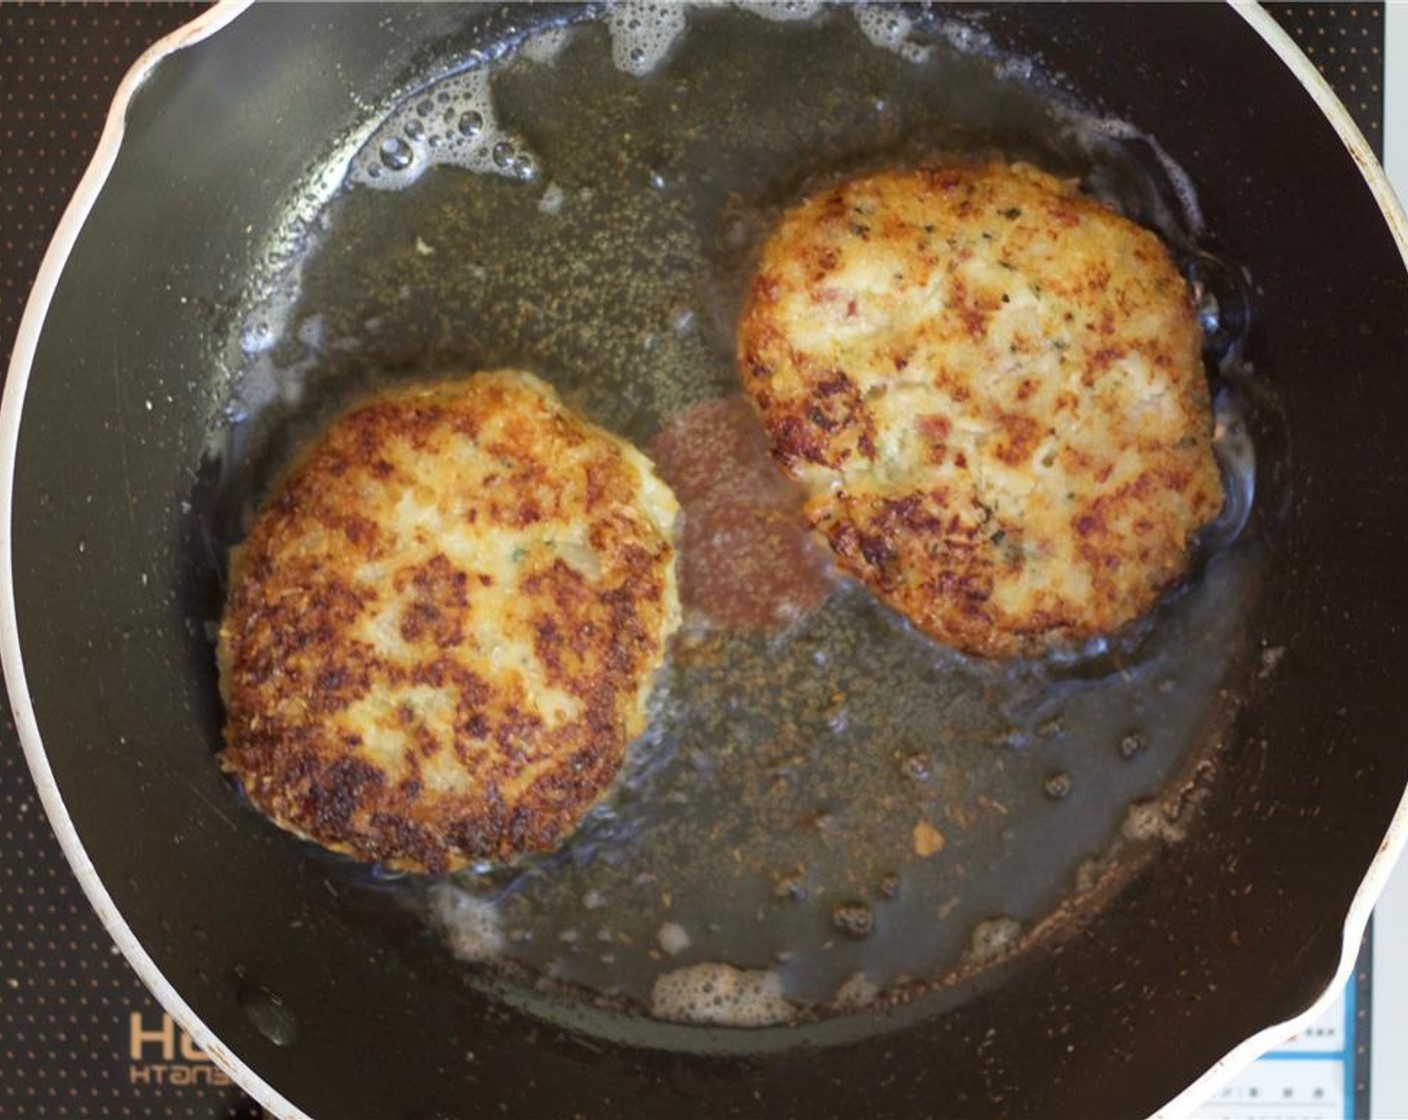 step 10 Heat a quarter-inch of Vegetable Oil (as needed) in a skillet over medium heat. Working in batches, cook croquettes in a single layer until golden brown, about 2 minutes per side. Transfer to paper towels to drain.